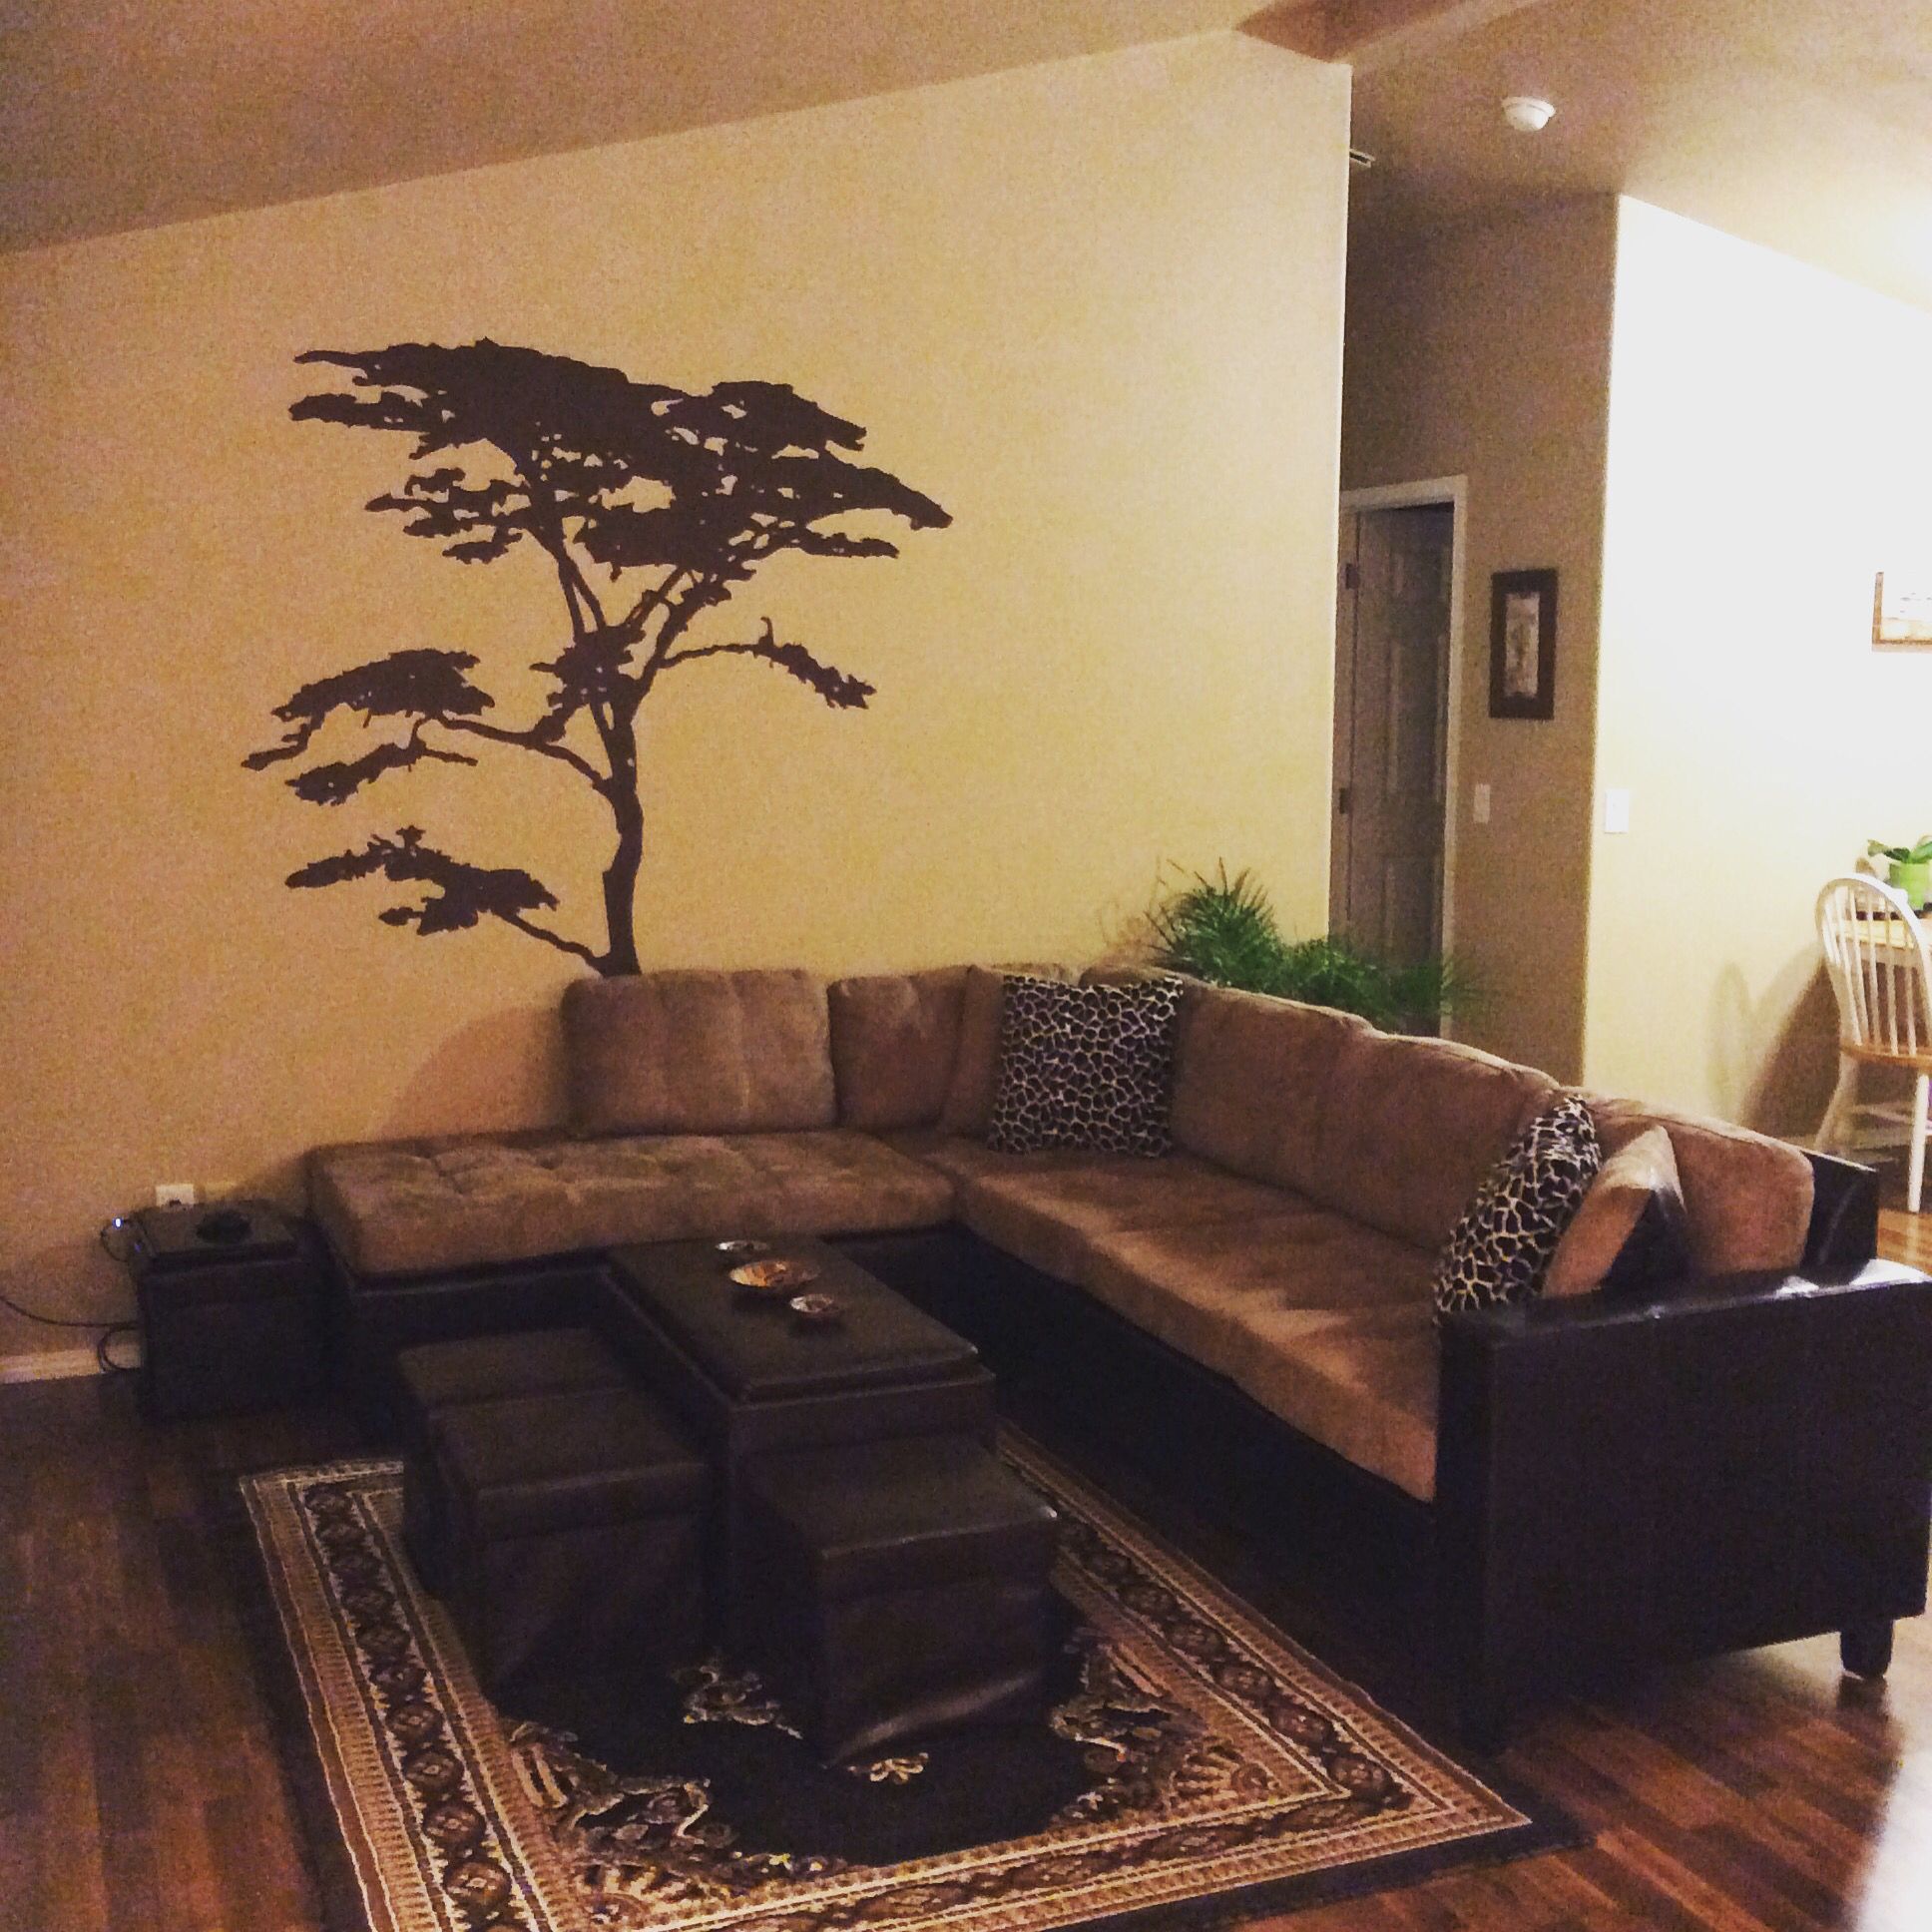 Acacia Tree Decali Like It!! | Tree Decals, Home Decor, Sectional Couch In Newest Acacia Tree Wall Art (Gallery 19 of 20)